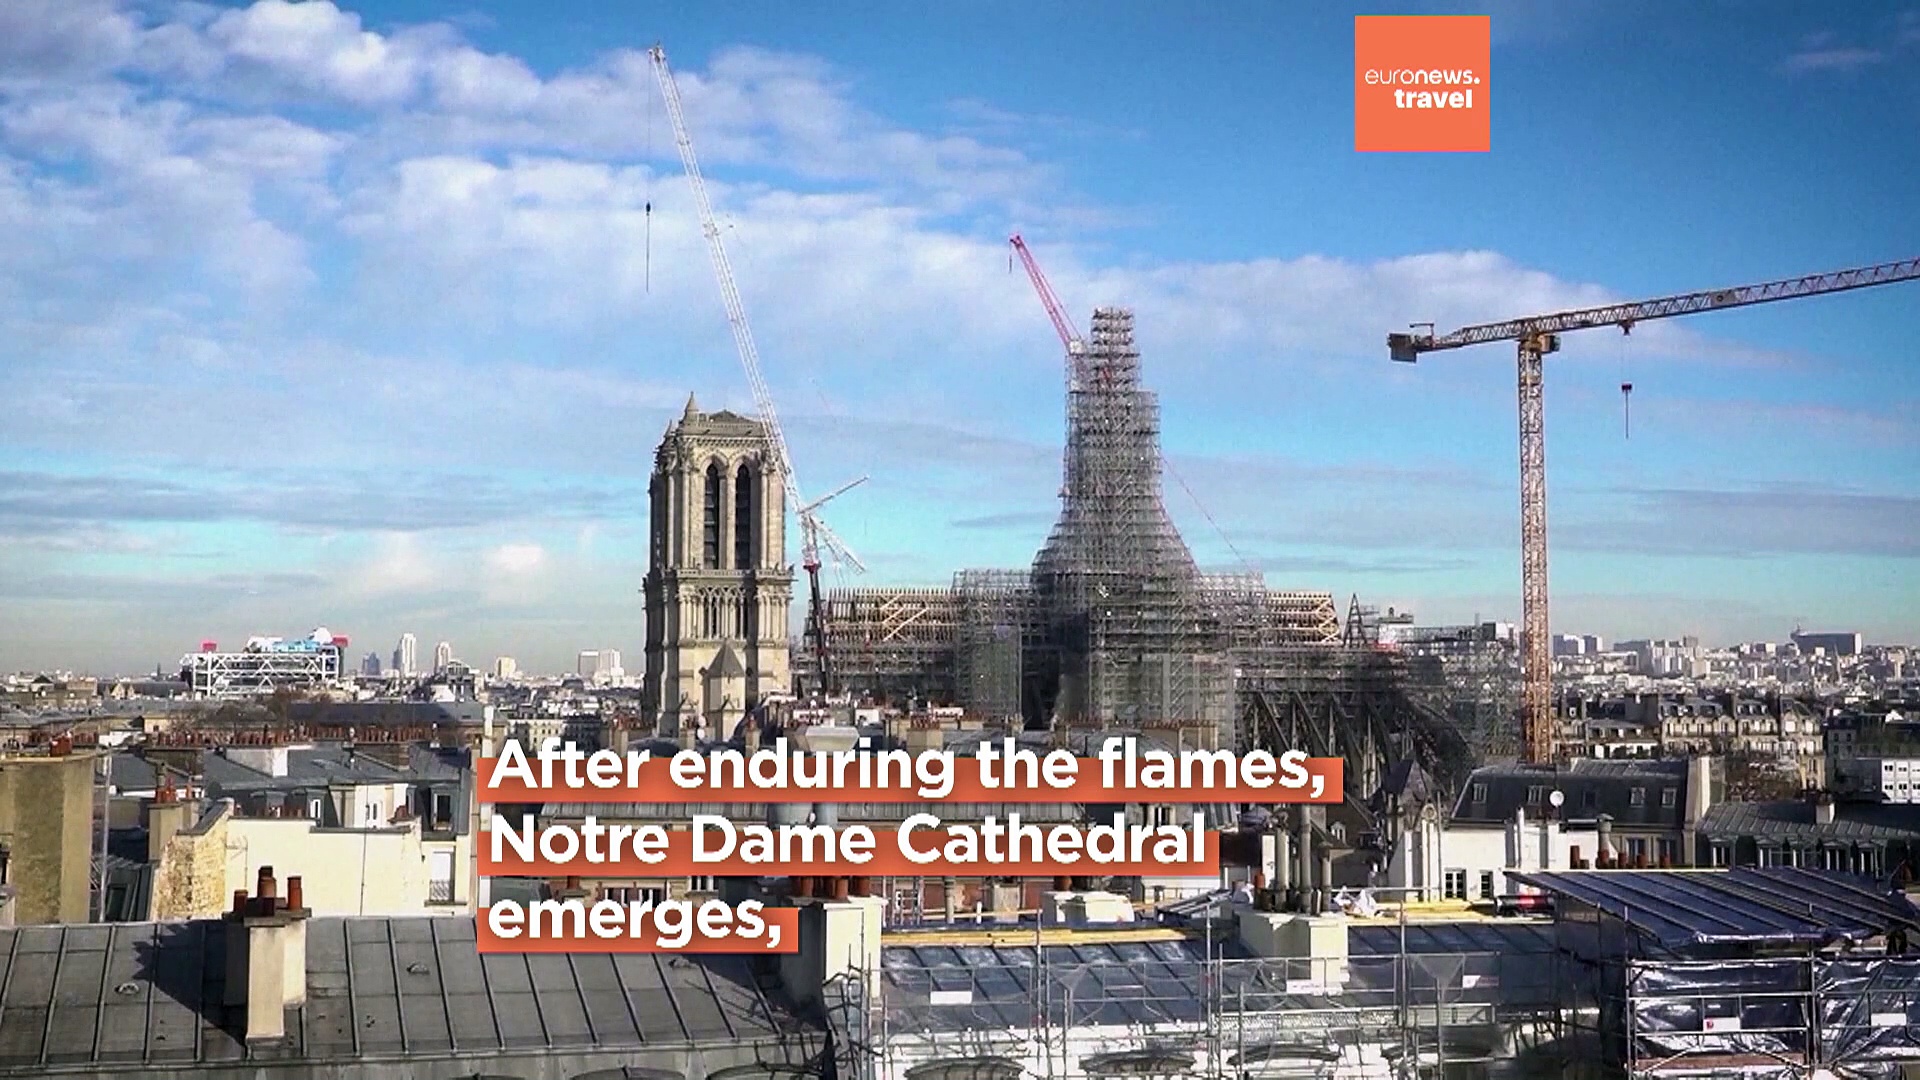 Notre Dame Cathedral could reopen at the end of 2024 as new Spire Emerges